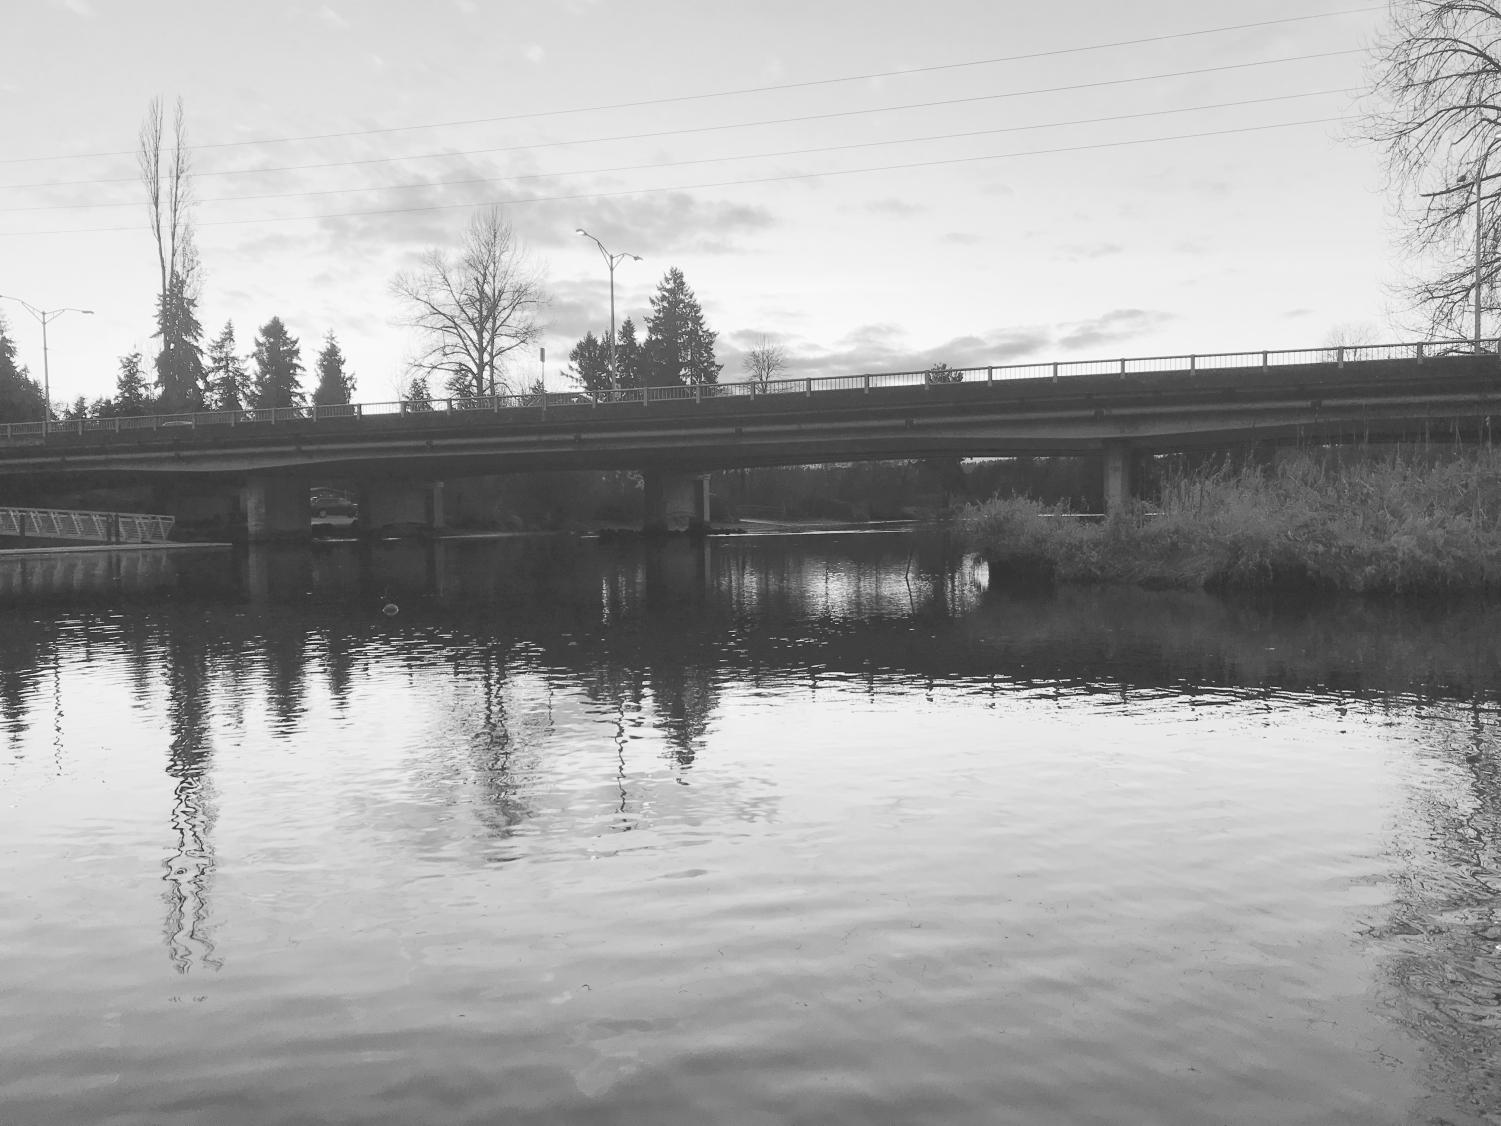 Cars+cross+the+West+Sammamish+River+Bridge+at+sunset+on+Feb.+3%2C+2020.+The+bridge+is+set+to+be+demolished+during+the+second+phase+of+the+project+in+2021.+Photo+by+Sonya+Sheptunov